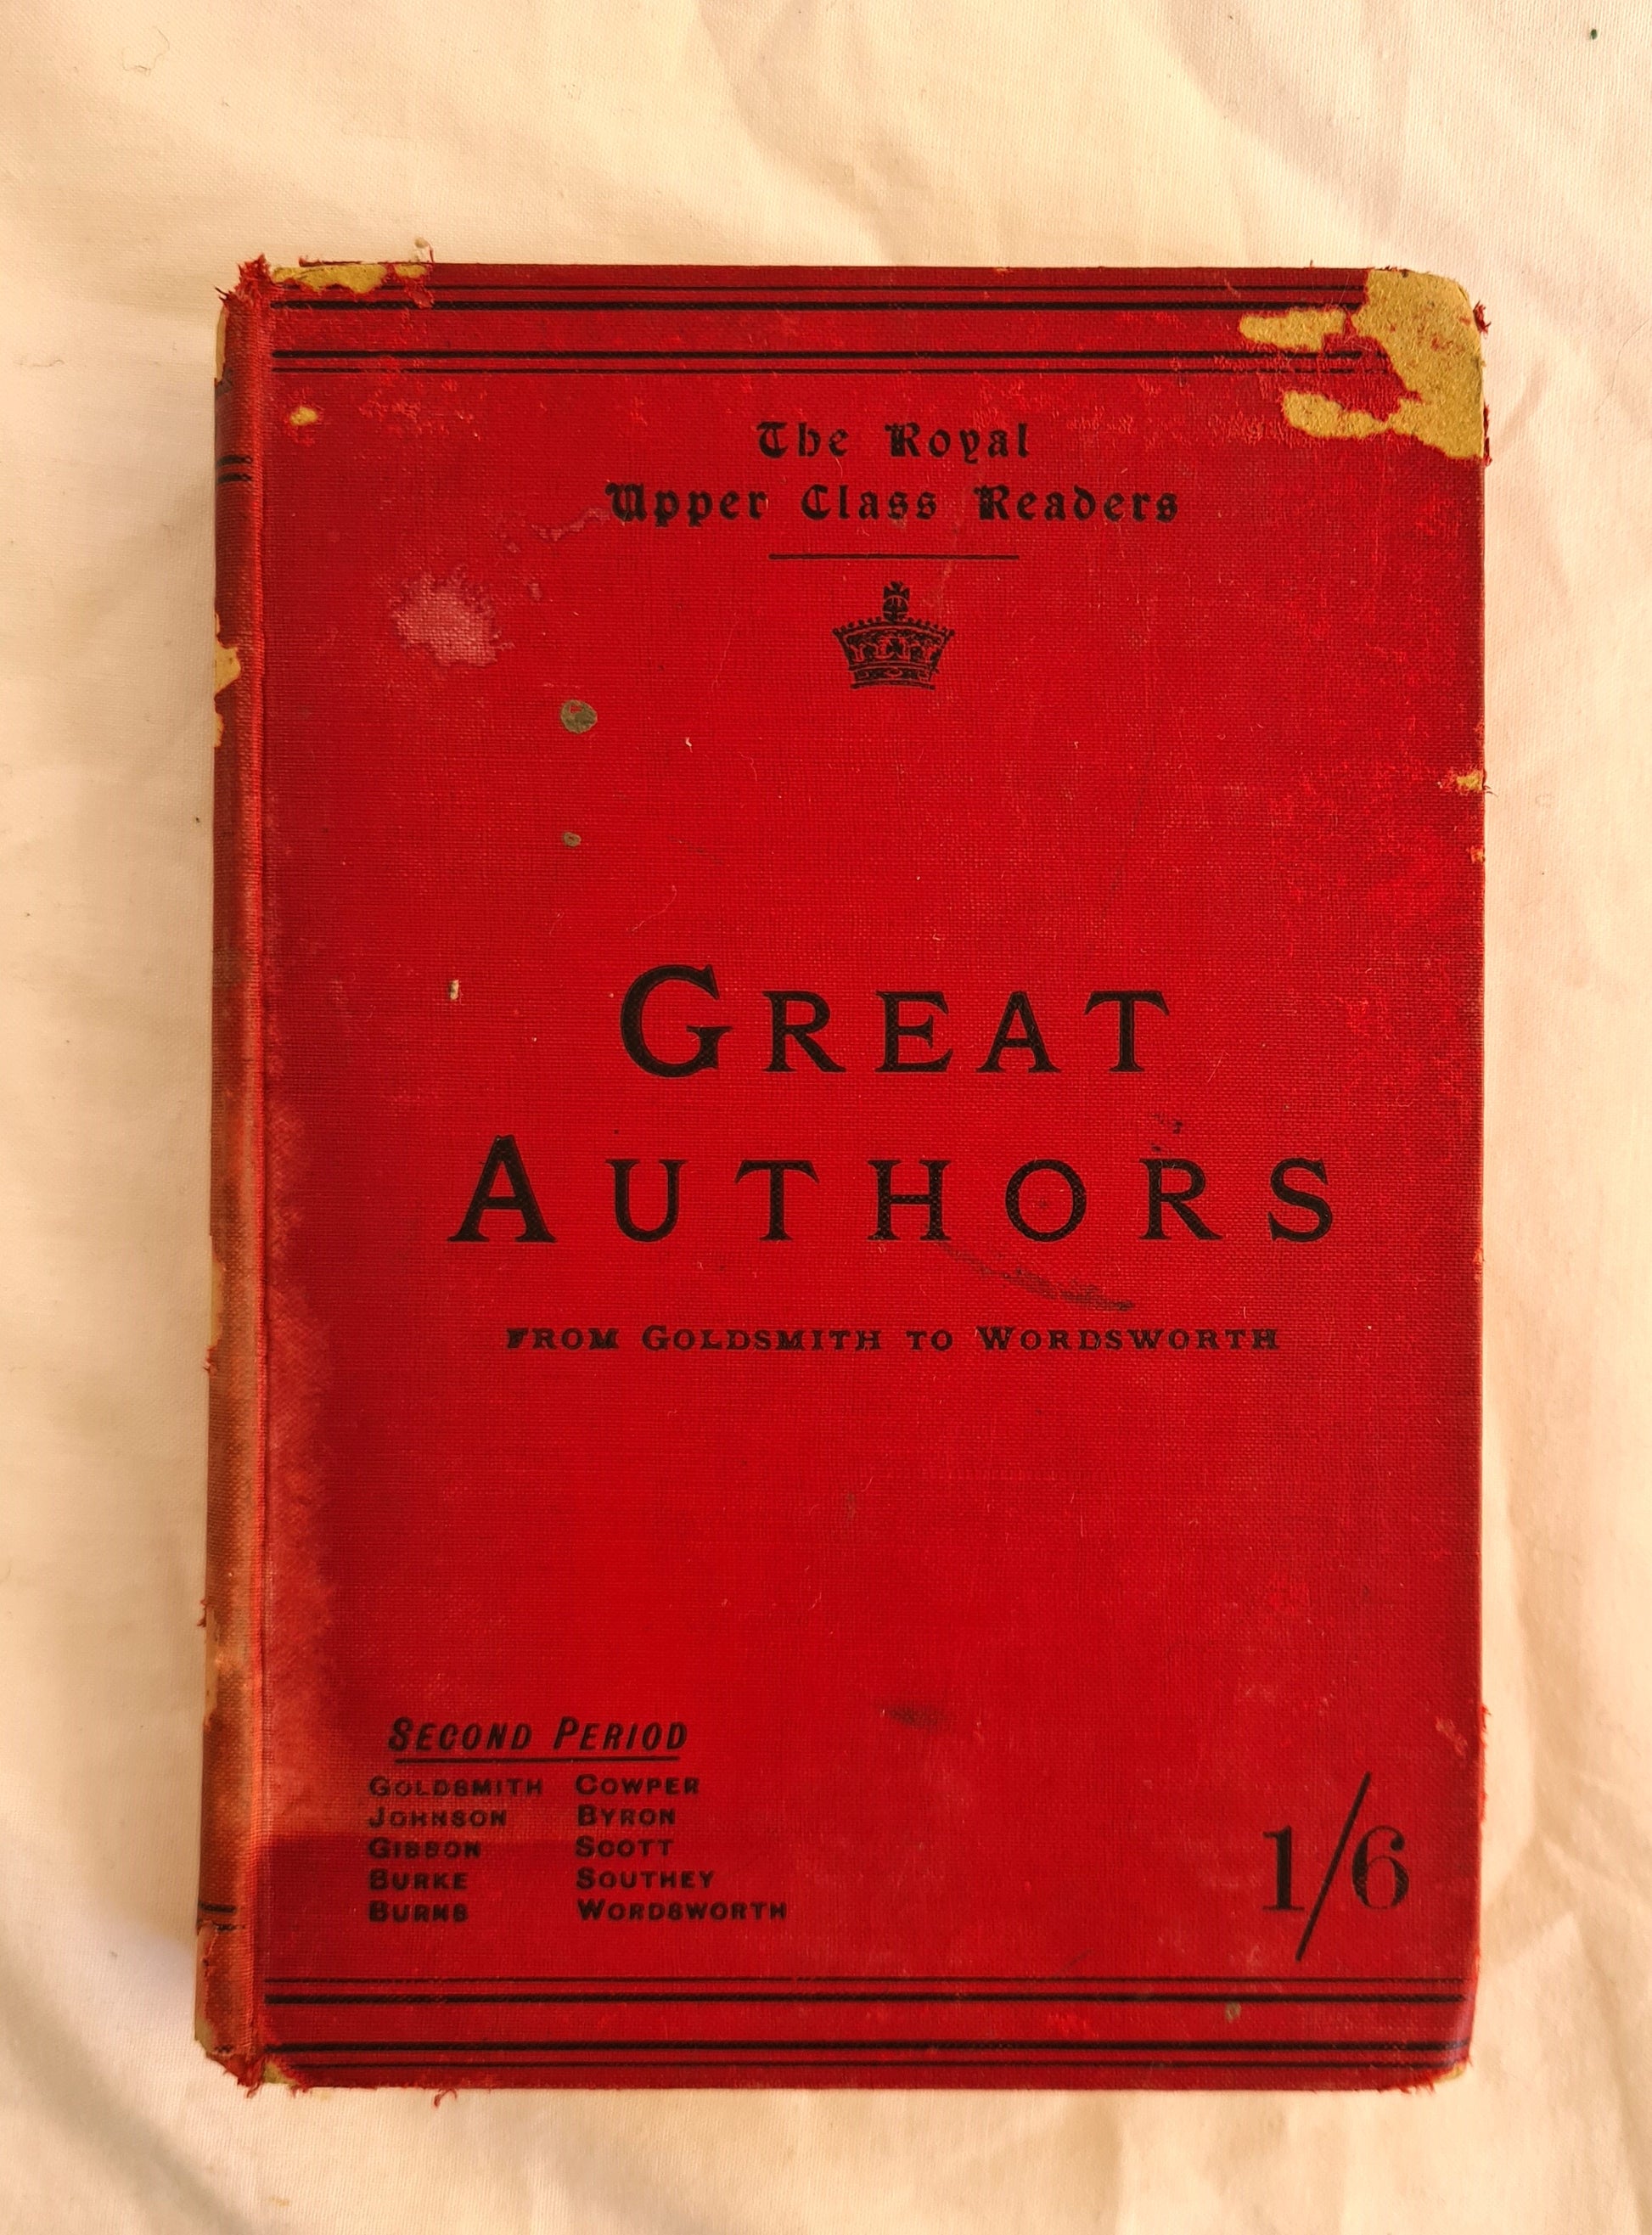 Great Authors  From Goldsmith to Wordsworth  The Royal Upper Class Readers – Second Period